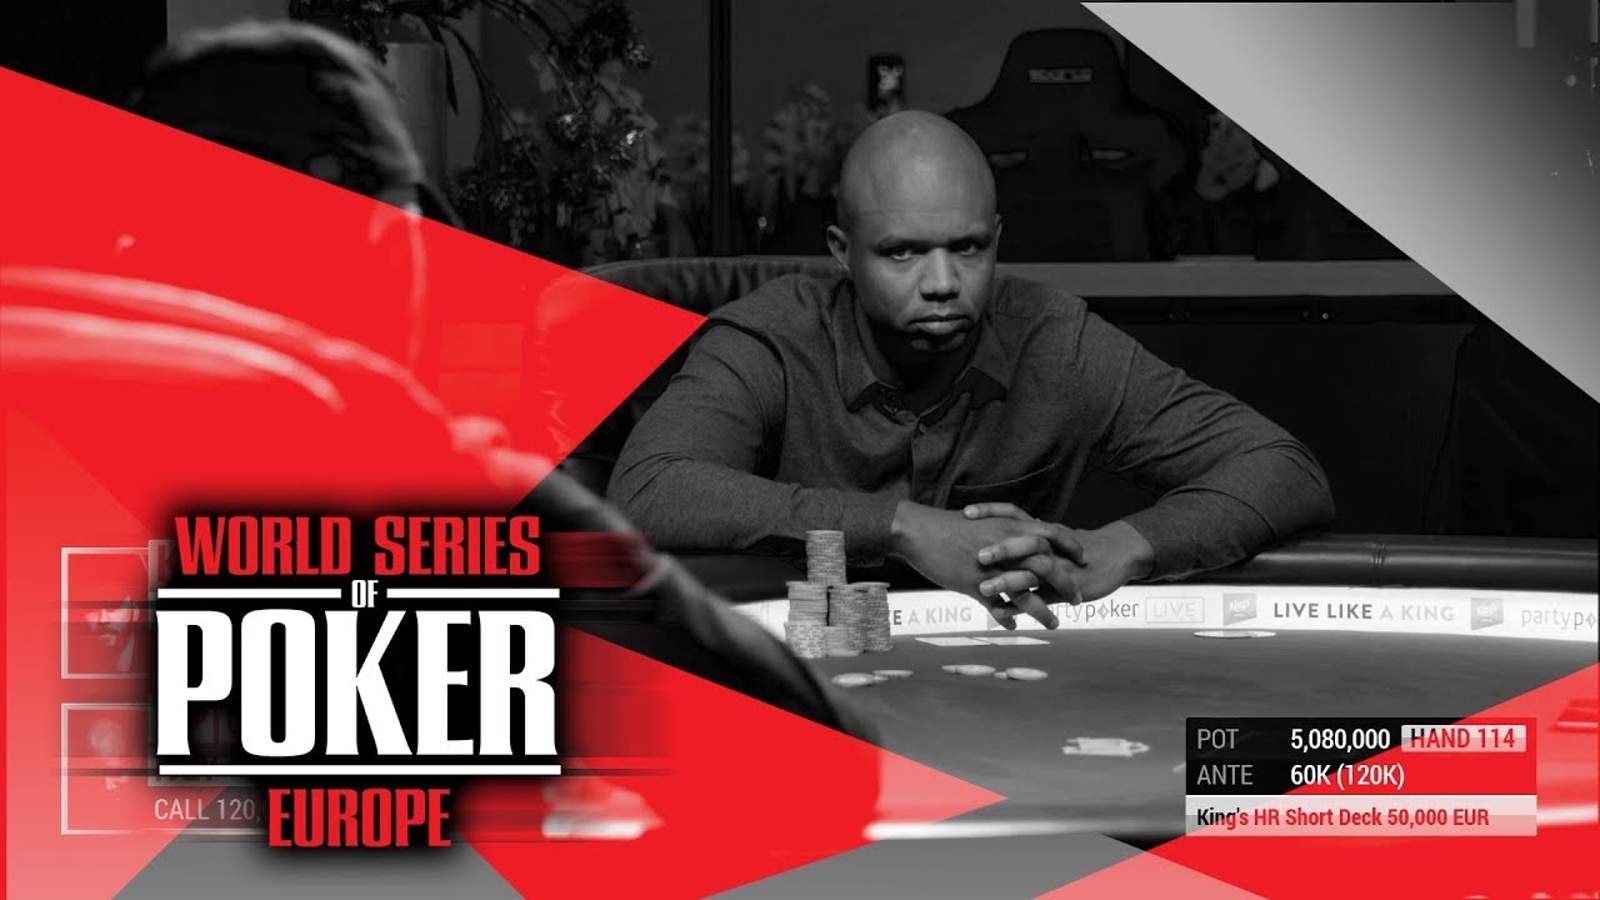 Phil Ivey Puts His Poker Skills on Display at World Series of Poker Europe